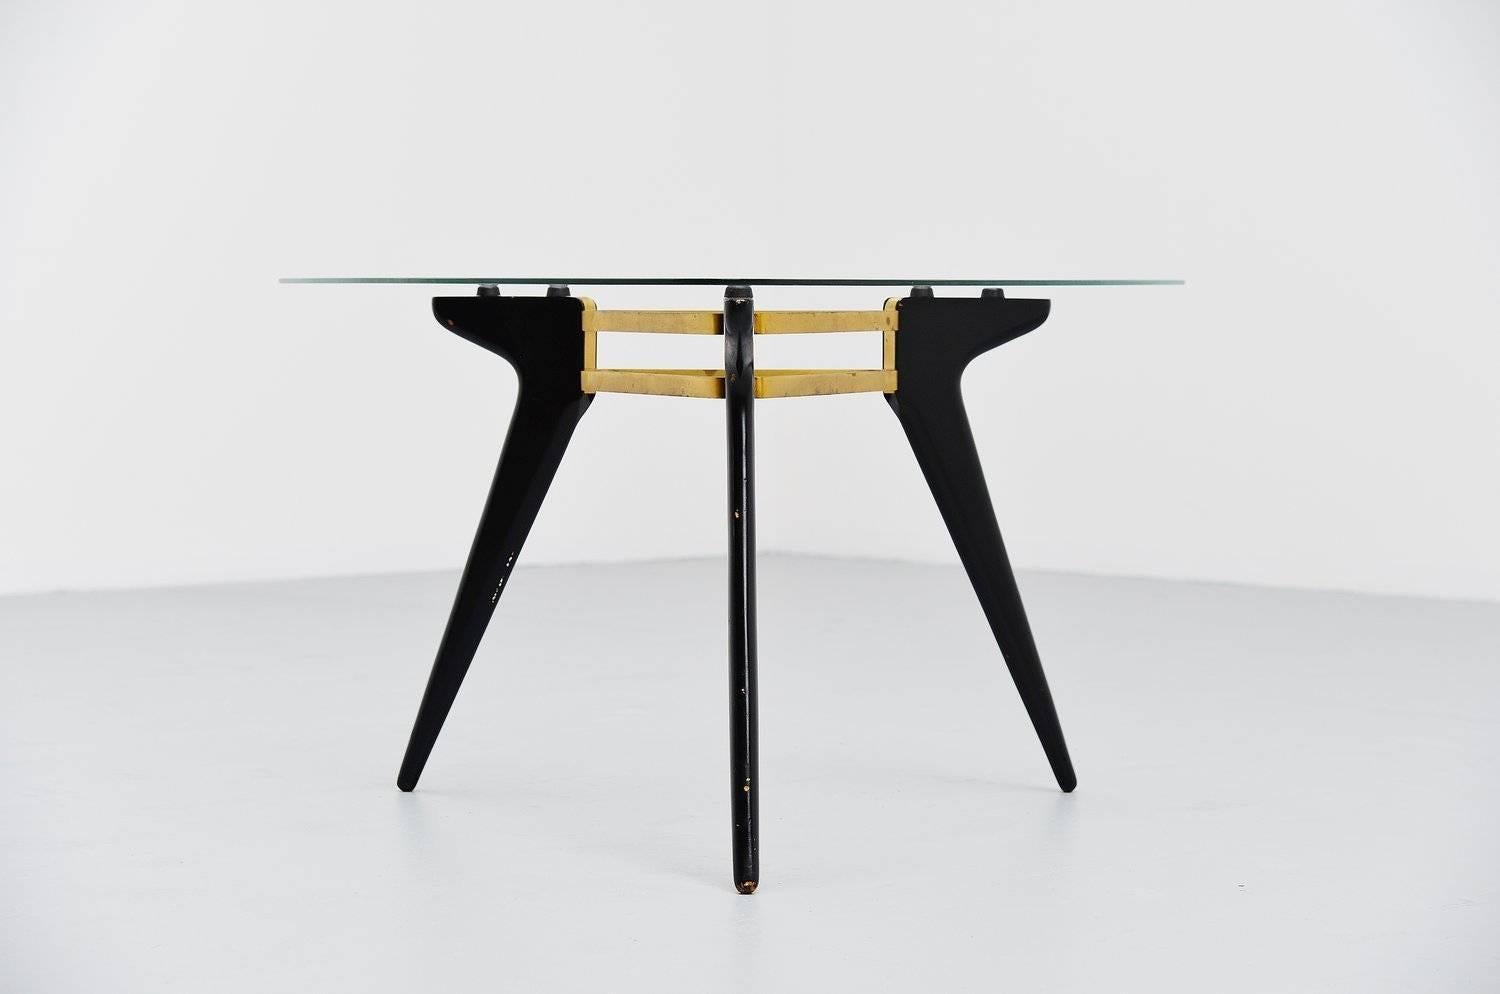 Very nice Belgian coffee table with black lacquered wooden legs, brass connected frame and a triangular glass top. This was from the end of the 1950s for sure but we don't know the manufacturer or designer. Probably from the 1958 Expo period, for